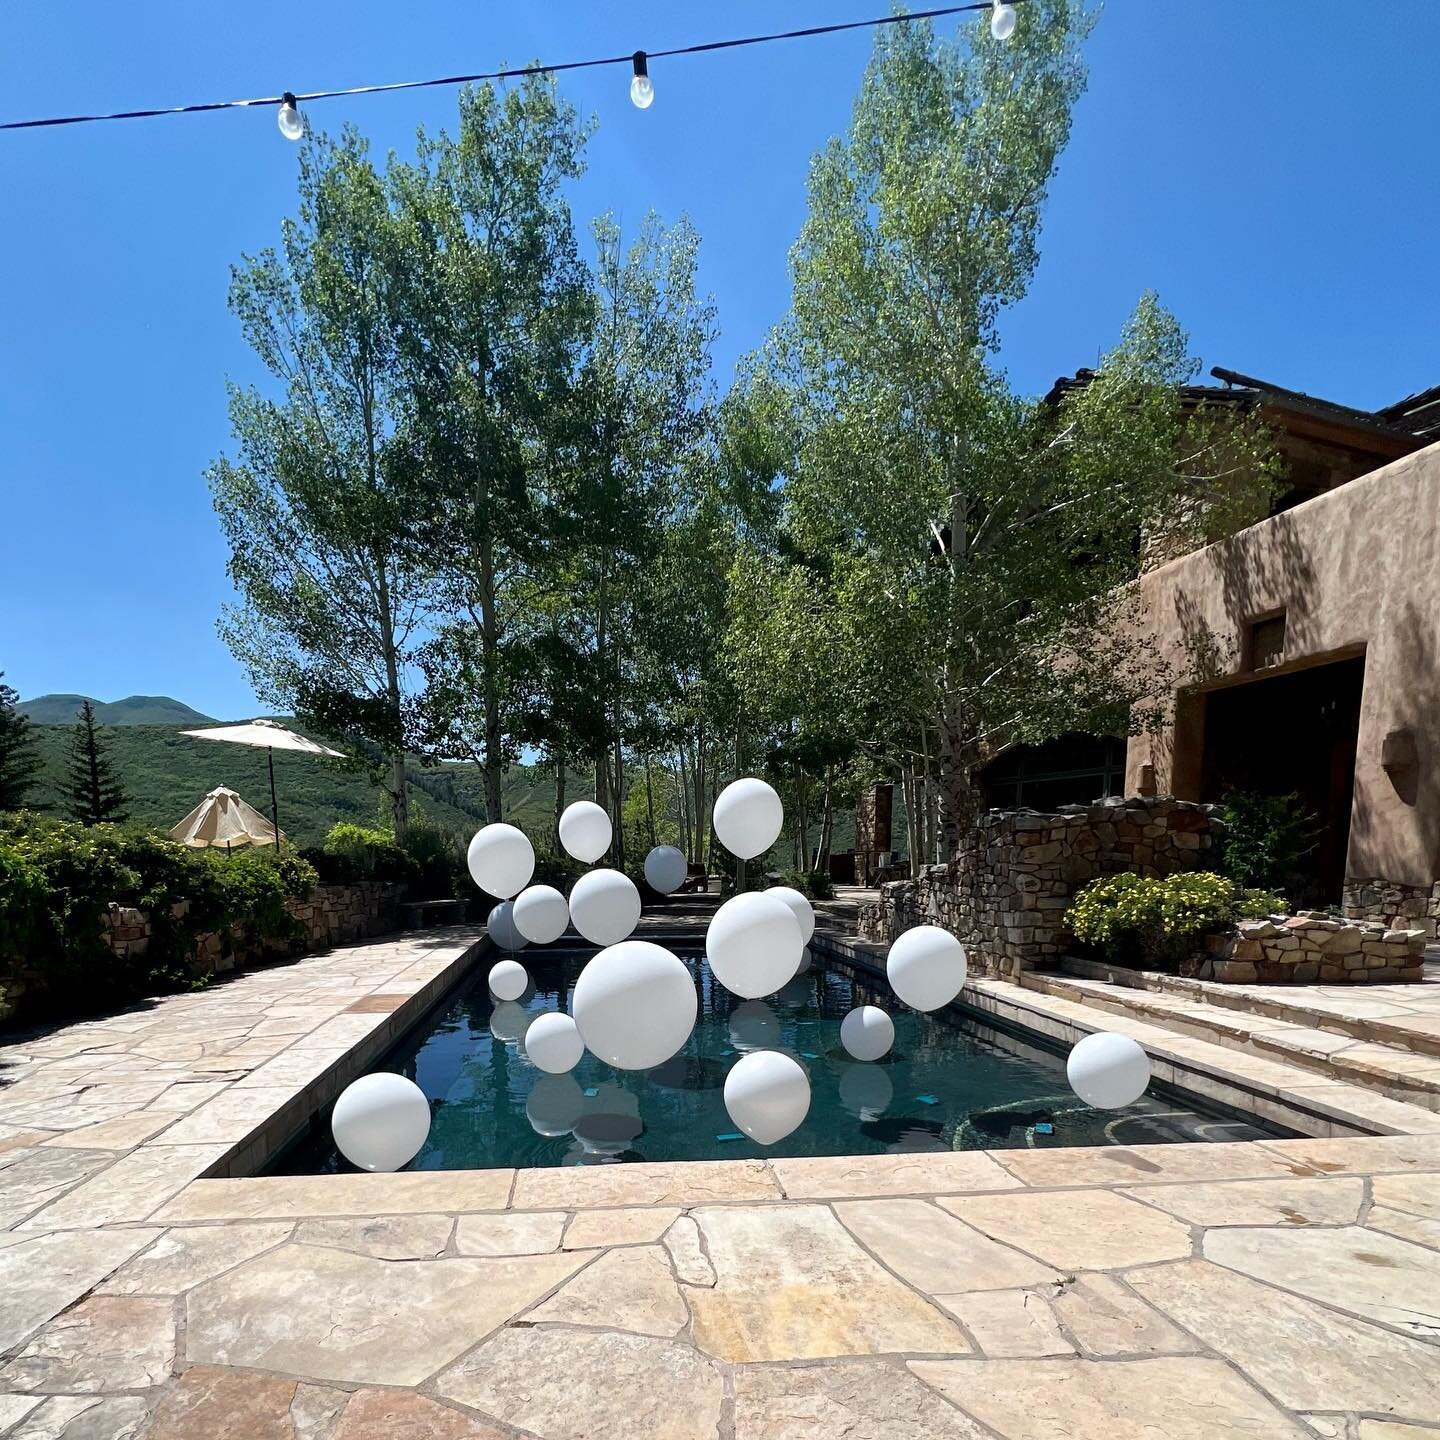 Helium Balloons in multiple sizes for this custom pool install 🤍